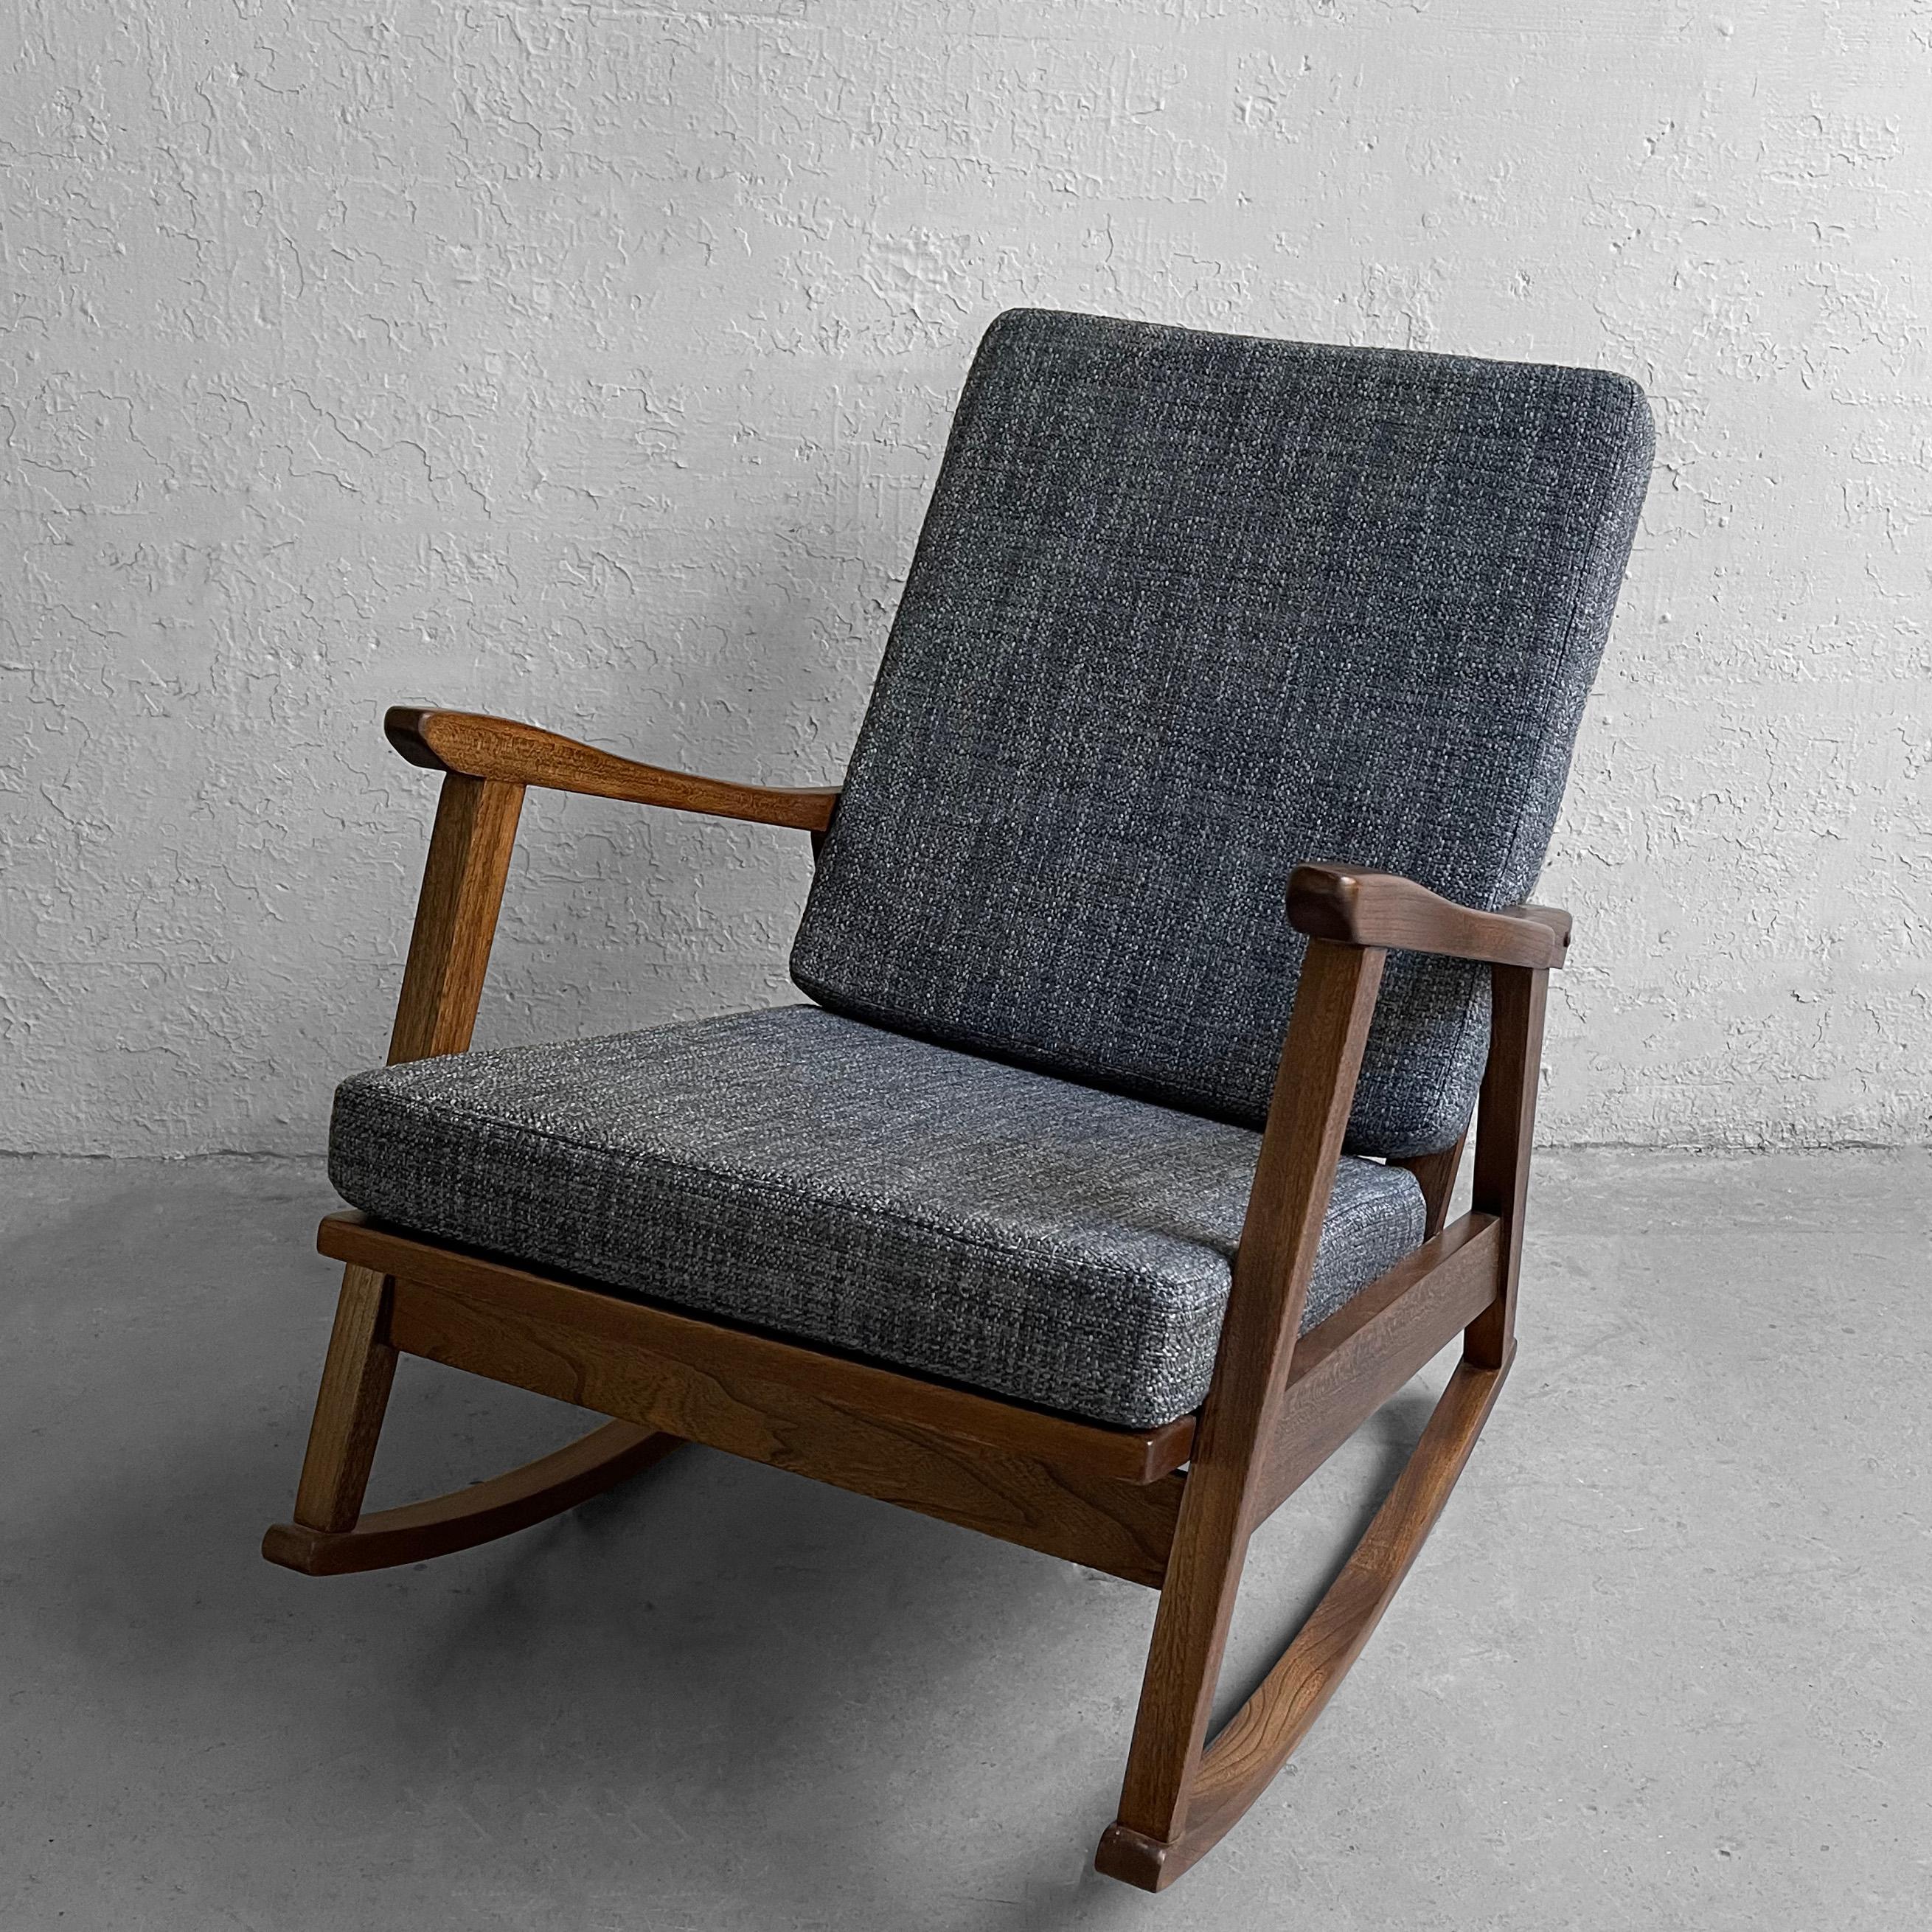 Scandinavian modern, rocking chair features a stylish and solid beech frame with newly upholstered cushions in blue tweed wool blend. Scandinavian modern design produced in Yugoslavia circa 1960's.

